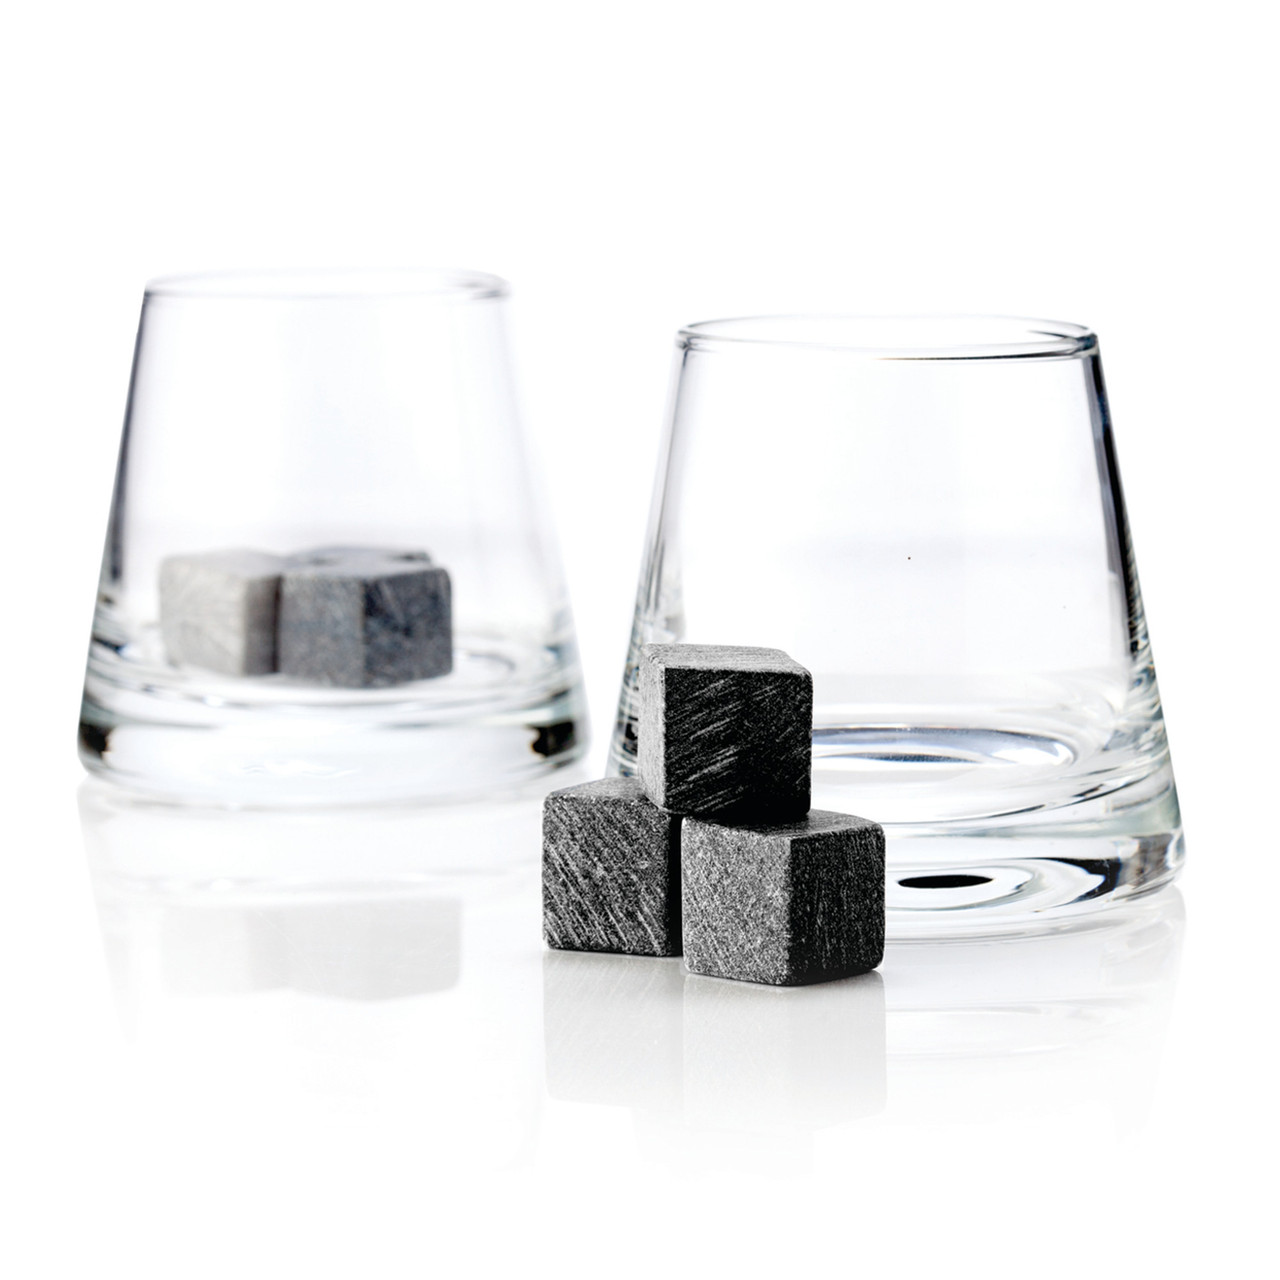 https://cdn11.bigcommerce.com/s-oo0gdojvjo/images/stencil/1280x1280/products/68663/101284/glacier-rocks-soapstone-cube-and-tumblers-by-viski-set-of-8-2__64415.1683795511.jpg?c=2&imbypass=on